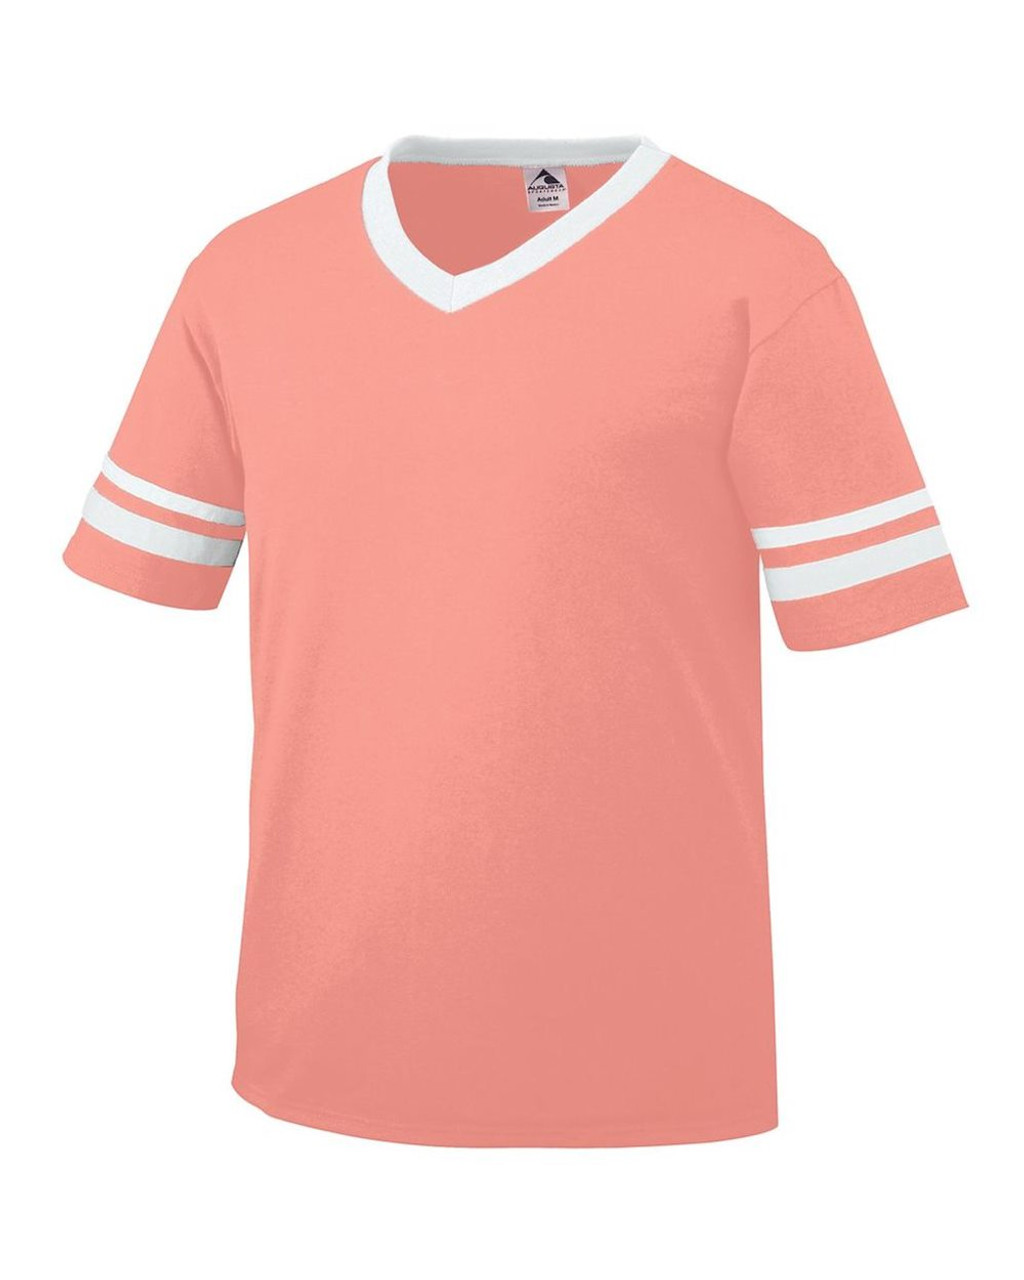 Custom Youth V-Neck Jersey with Striped Sleeves - 361